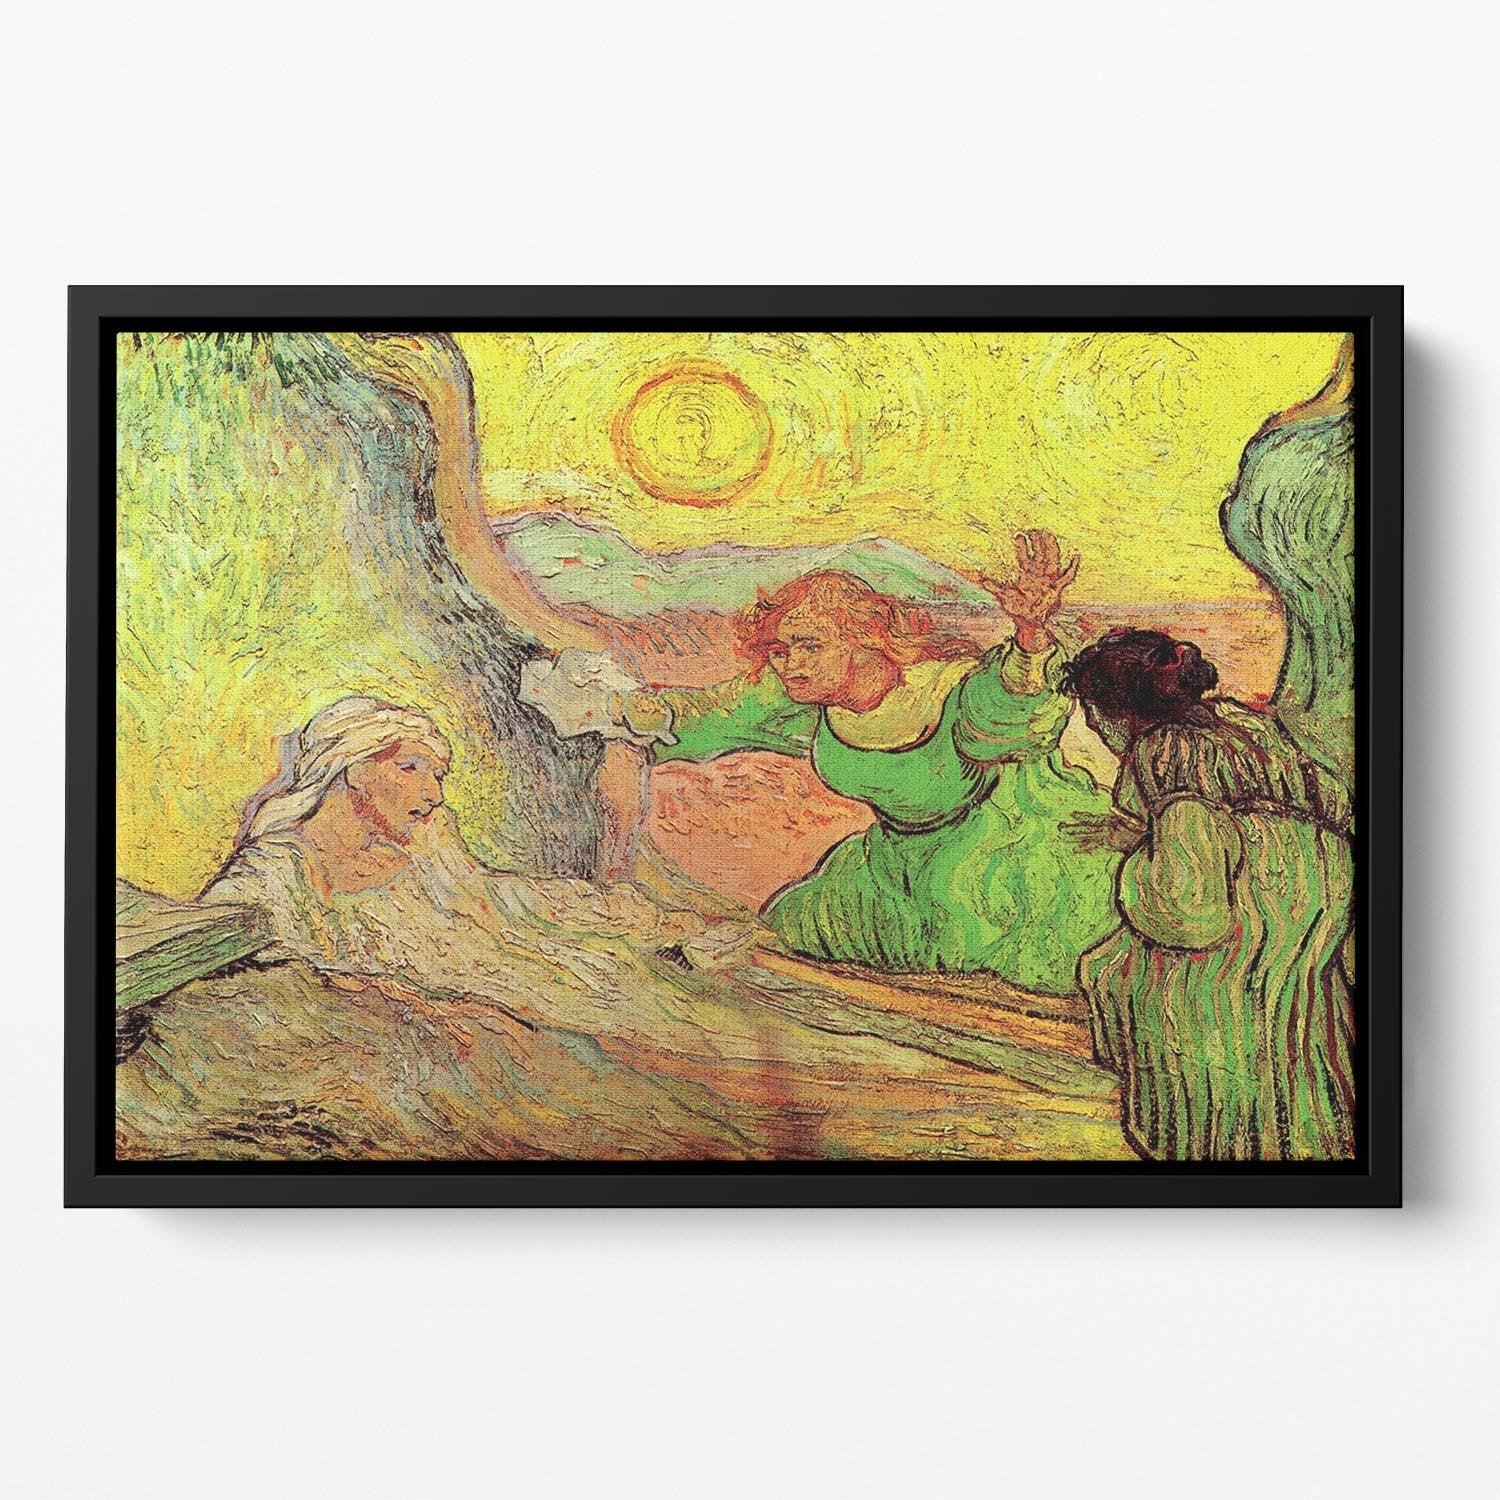 The Raising of Lazarus after Rembrandt by Van Gogh Floating Framed Canvas